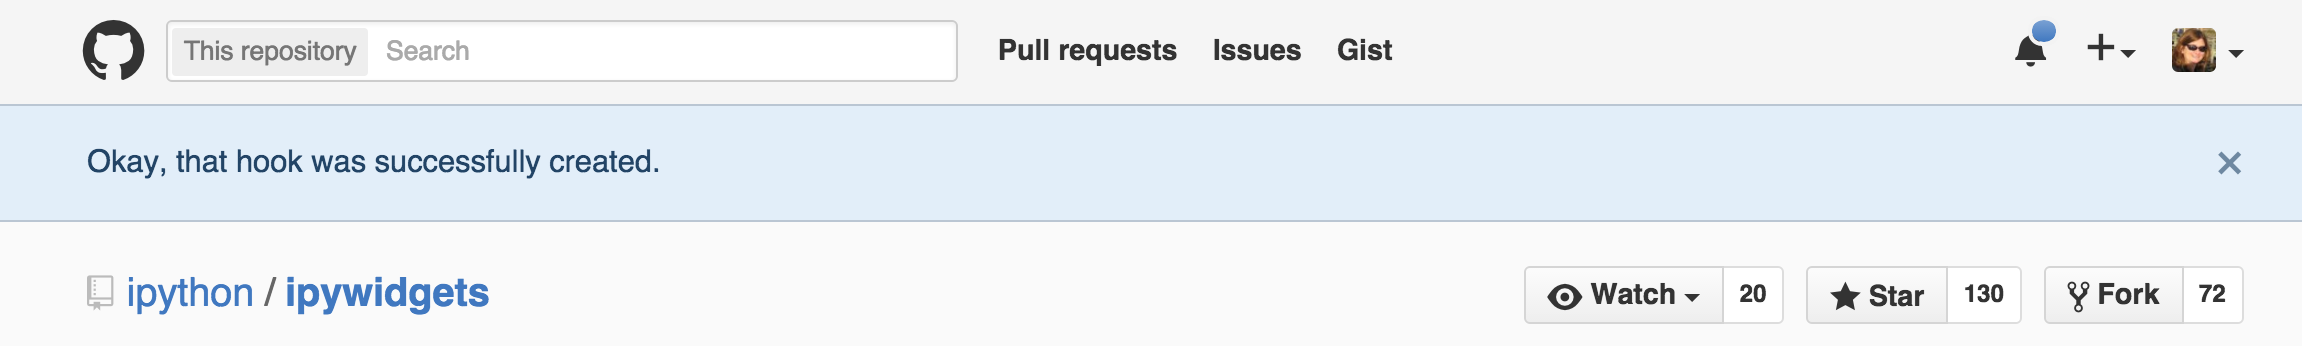 In GitHub, the ipywidgets repository page is open. A banner notification at the top of the page is displayed, reading "Okay, that hook was successfully created."